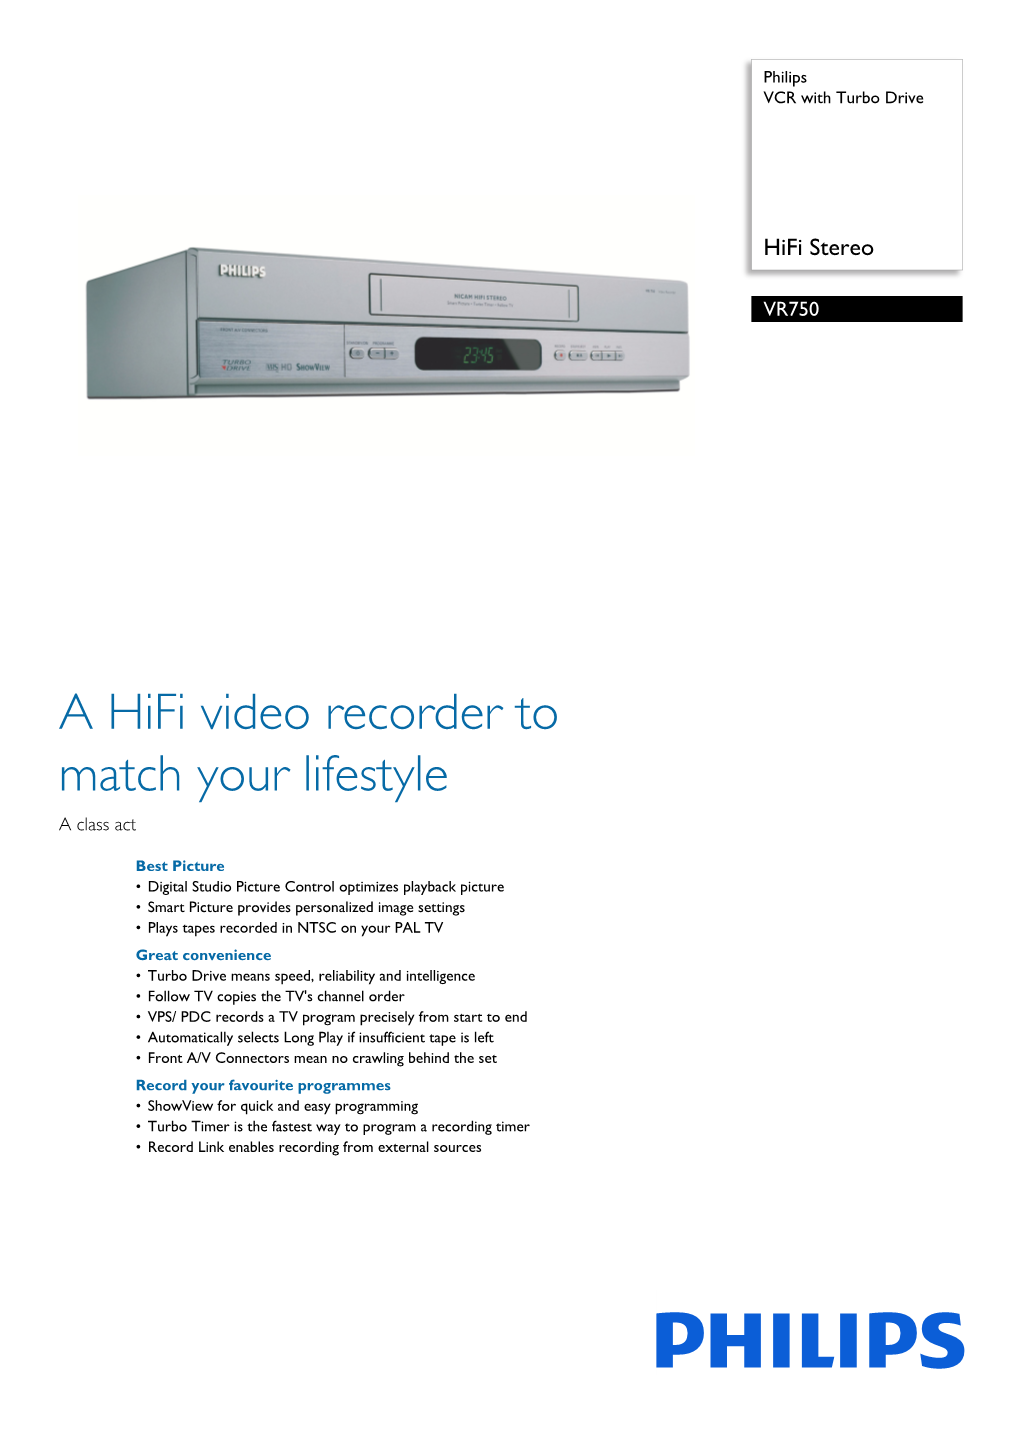 VR750/58 Philips VCR with Turbo Drive